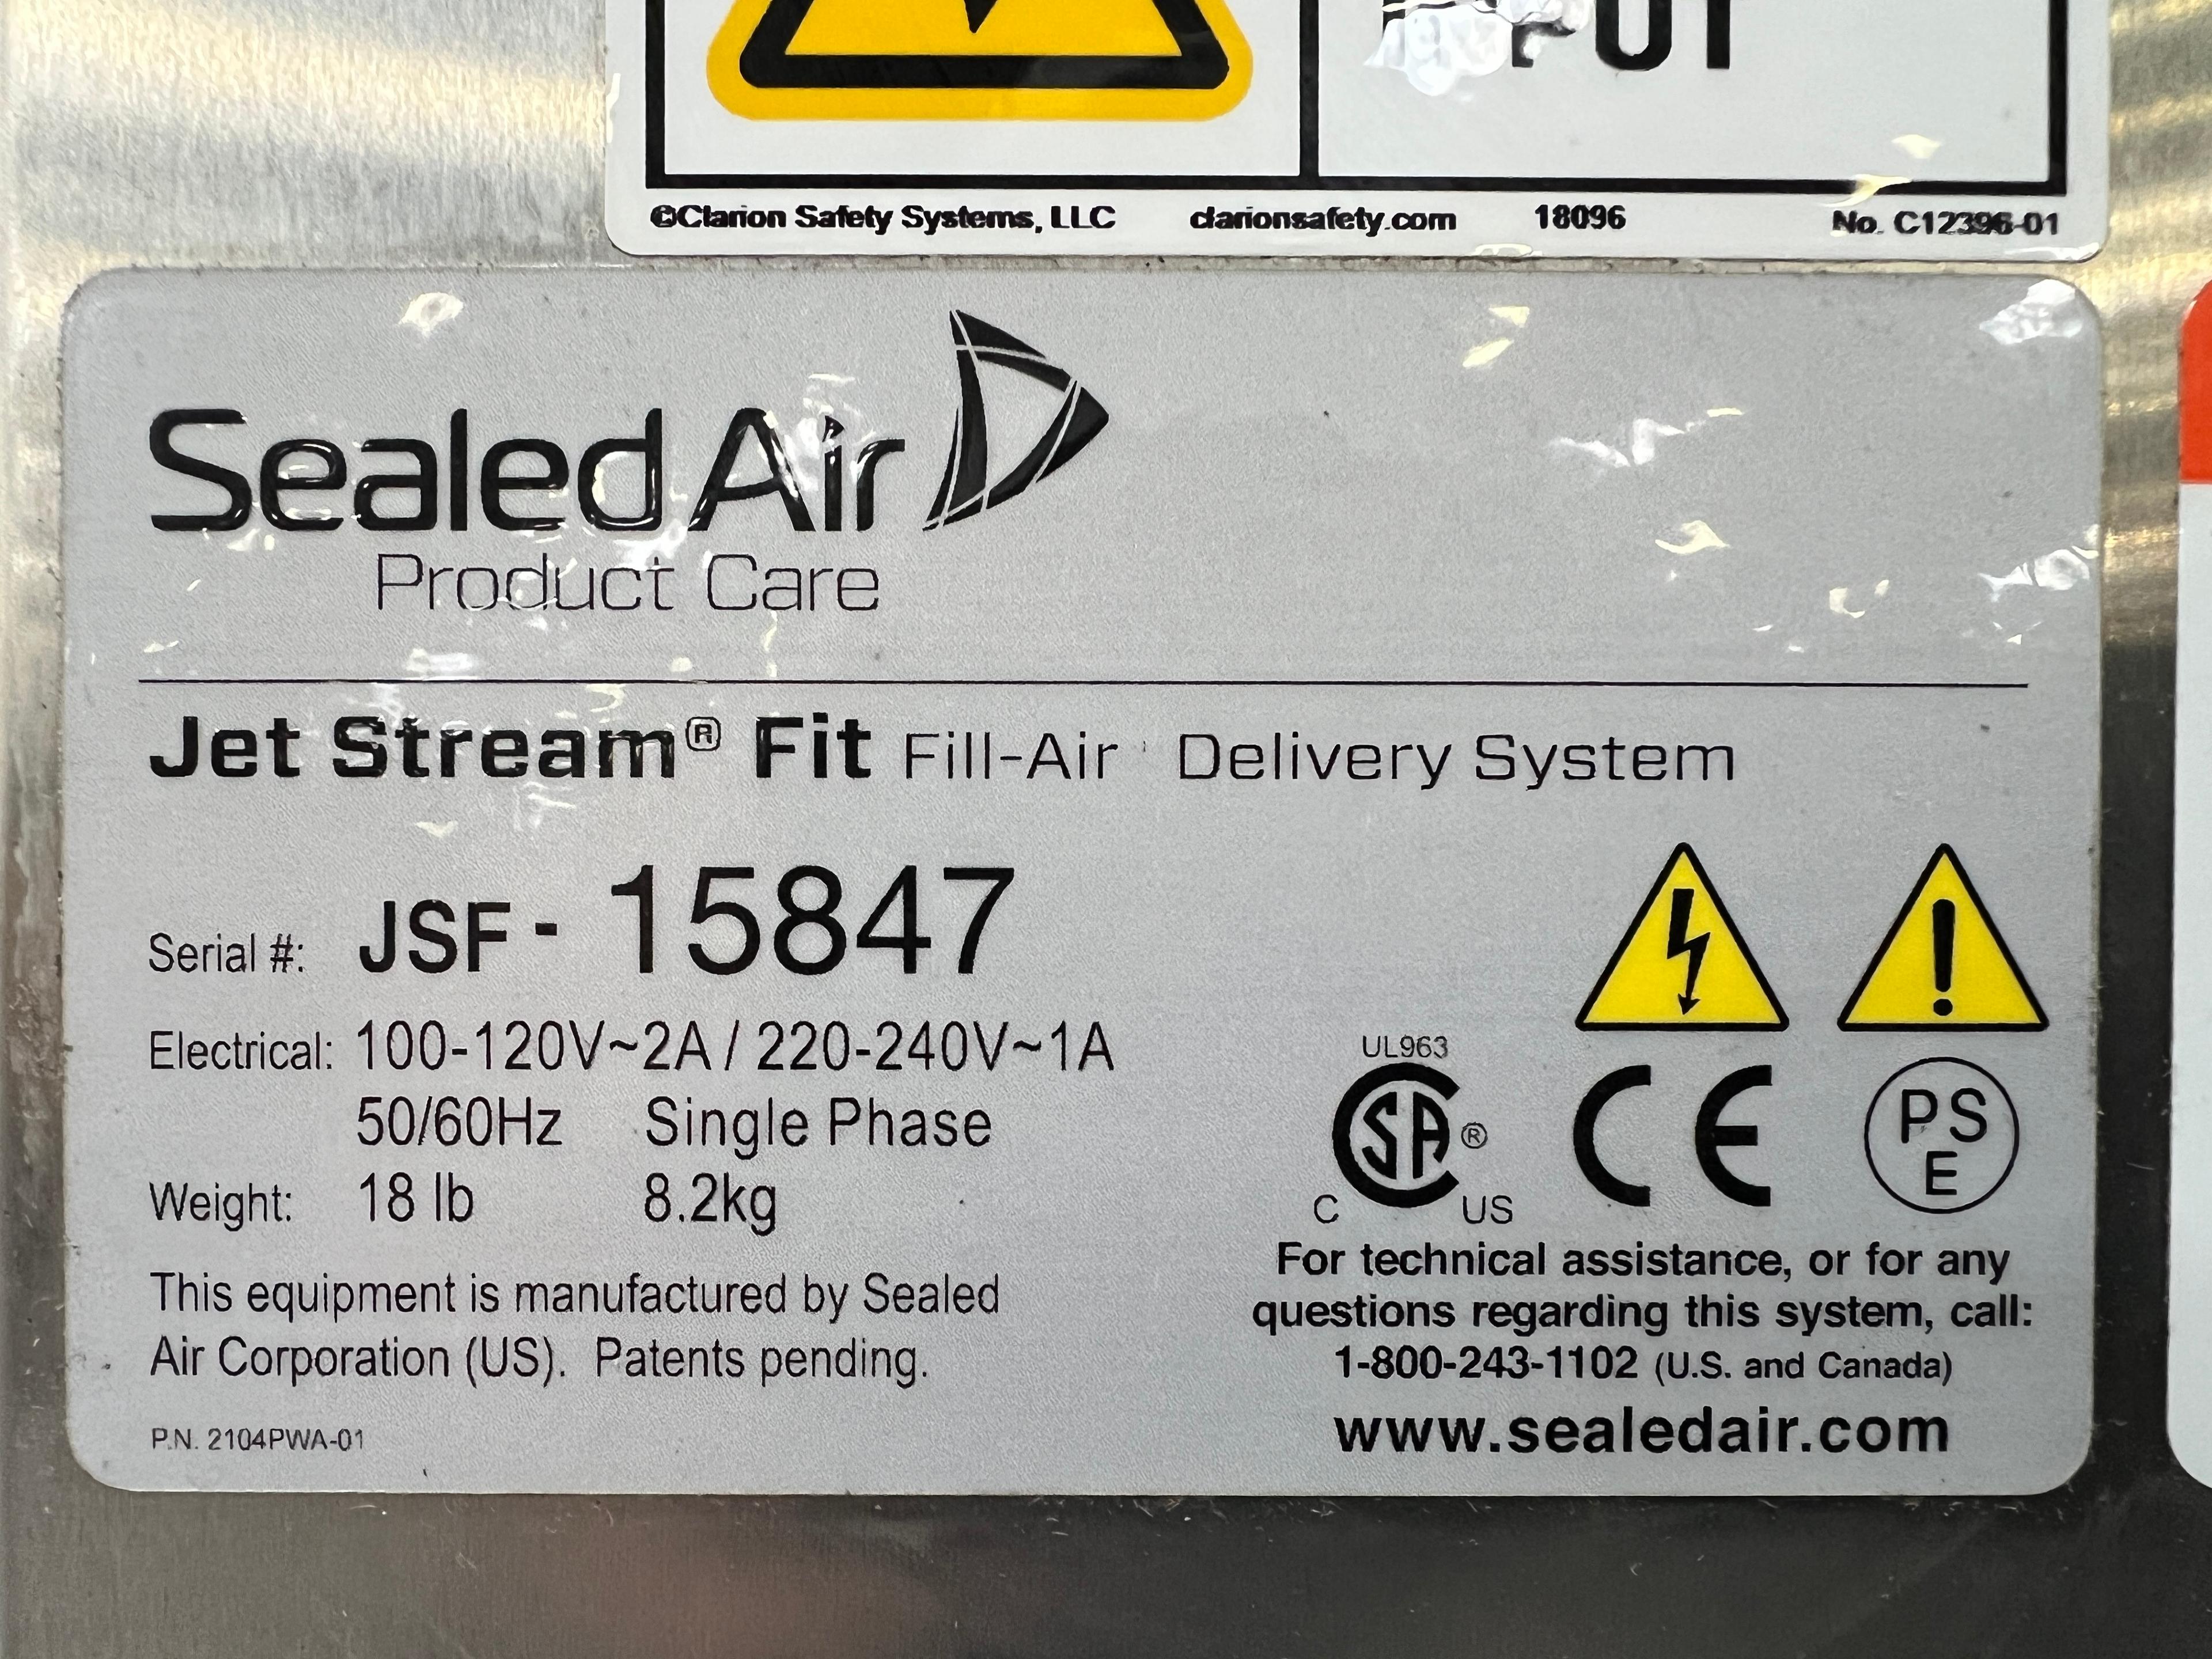 Sealed Air Jet Stream Delivery System Jsf-15847